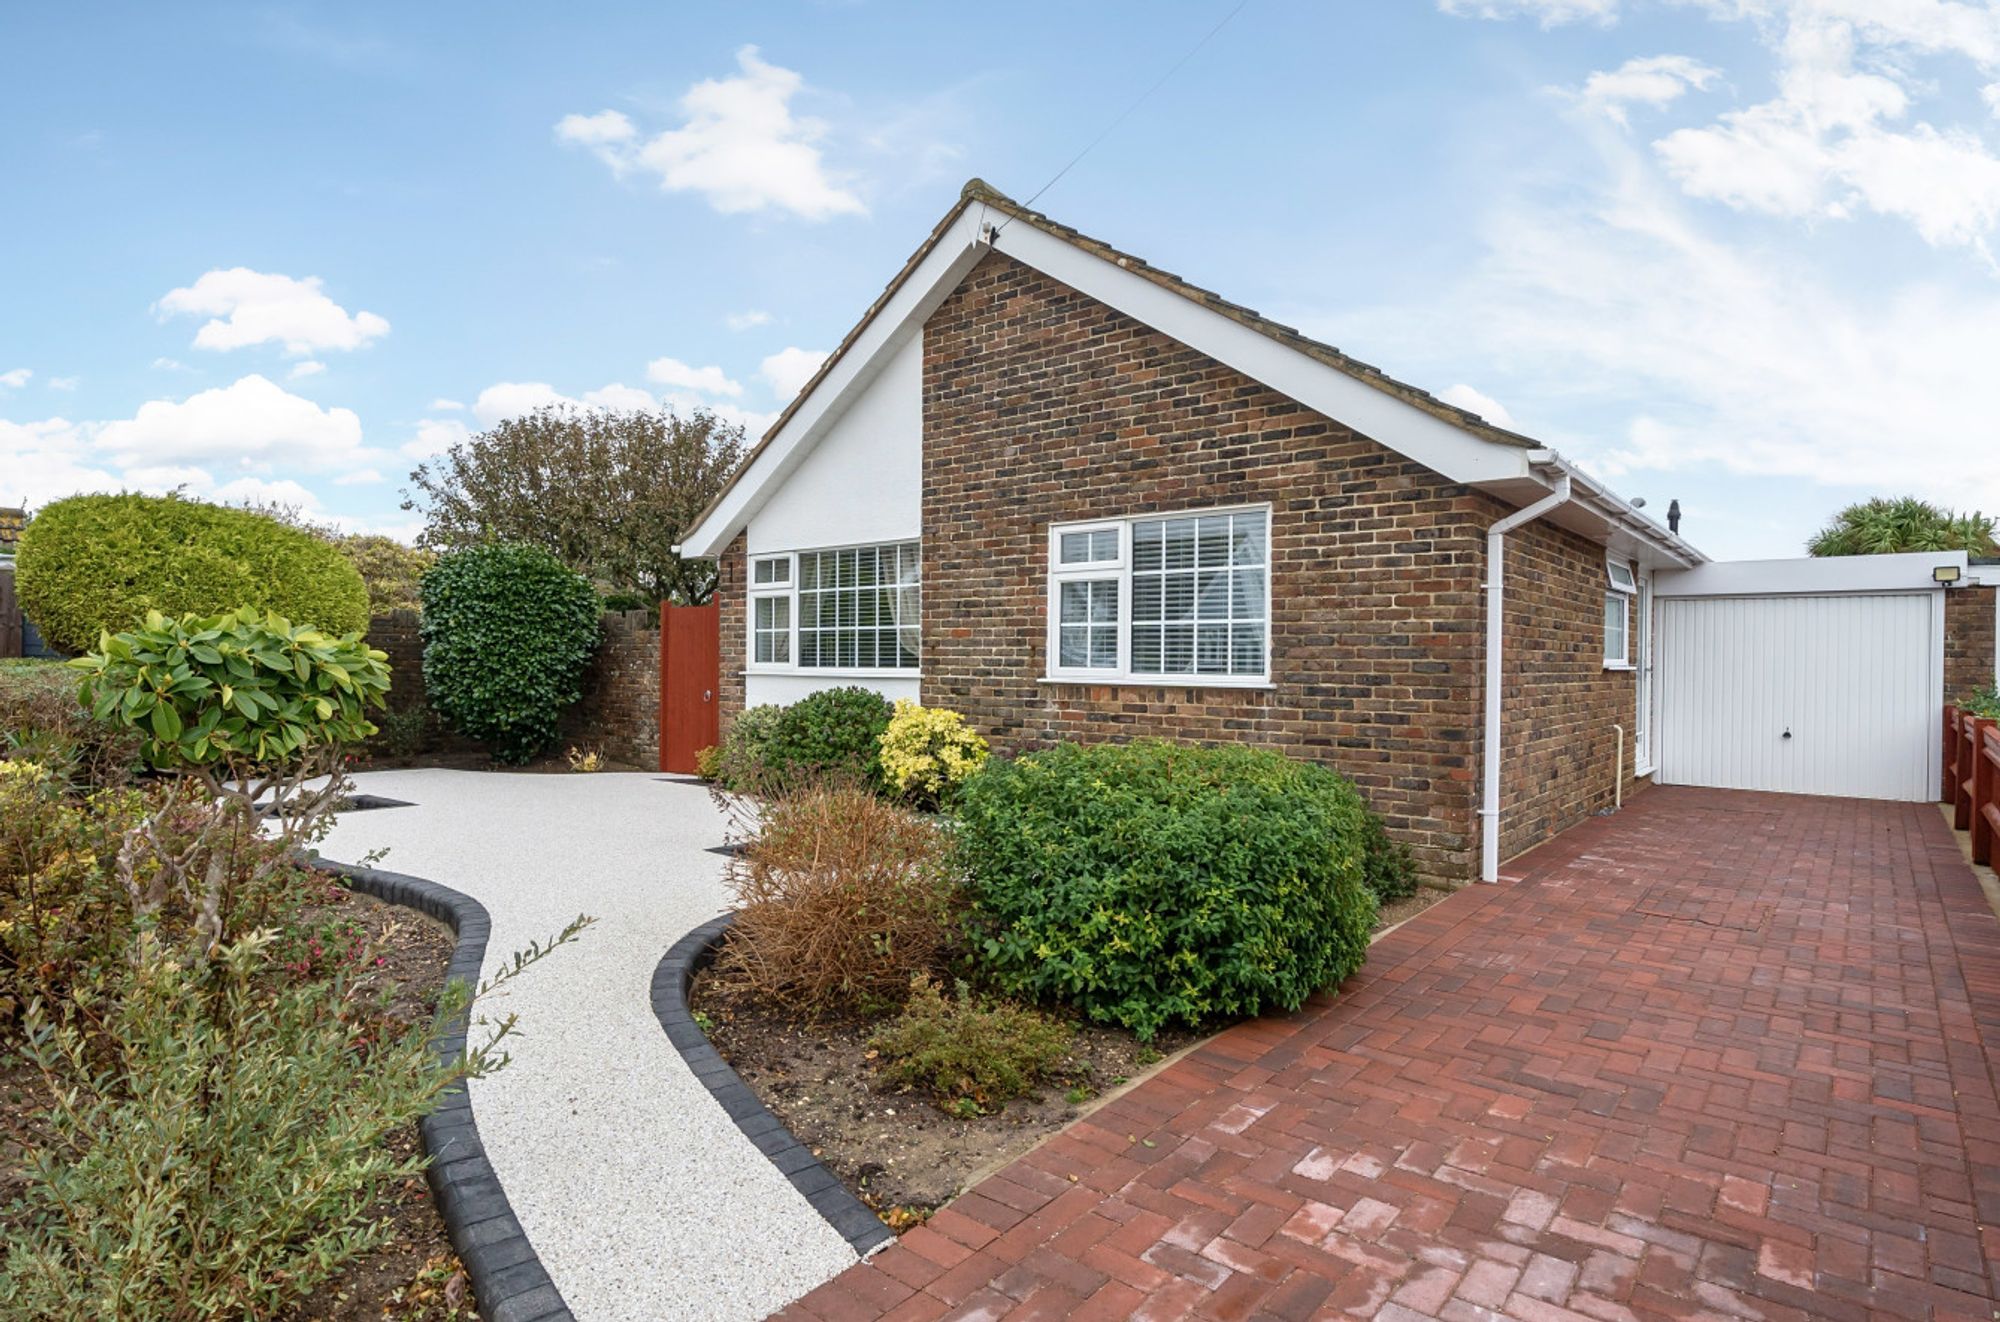 St. Itha Close, Selsey, PO20